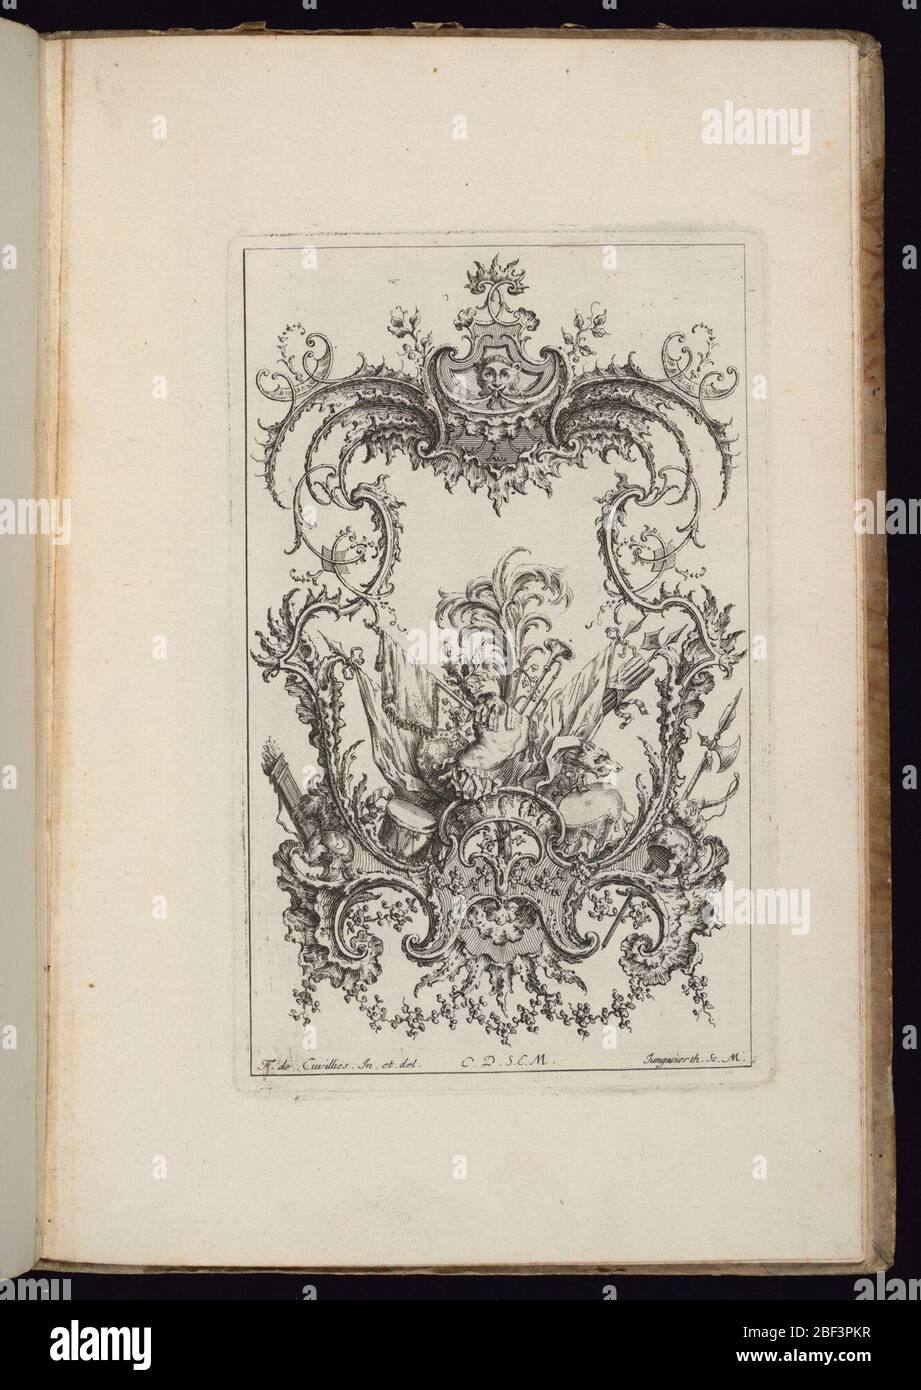 Cartouche with Armorial Trophy Livre dornements Book of Ornaments. Design for upright symmetrical cartouche, topped with a mask and surrounded by ornamental scrollwork. Within the frame, an elaborate armorial trophy featuring a suit of armor, drums, trumpet, a shield, and banners. Stock Photo